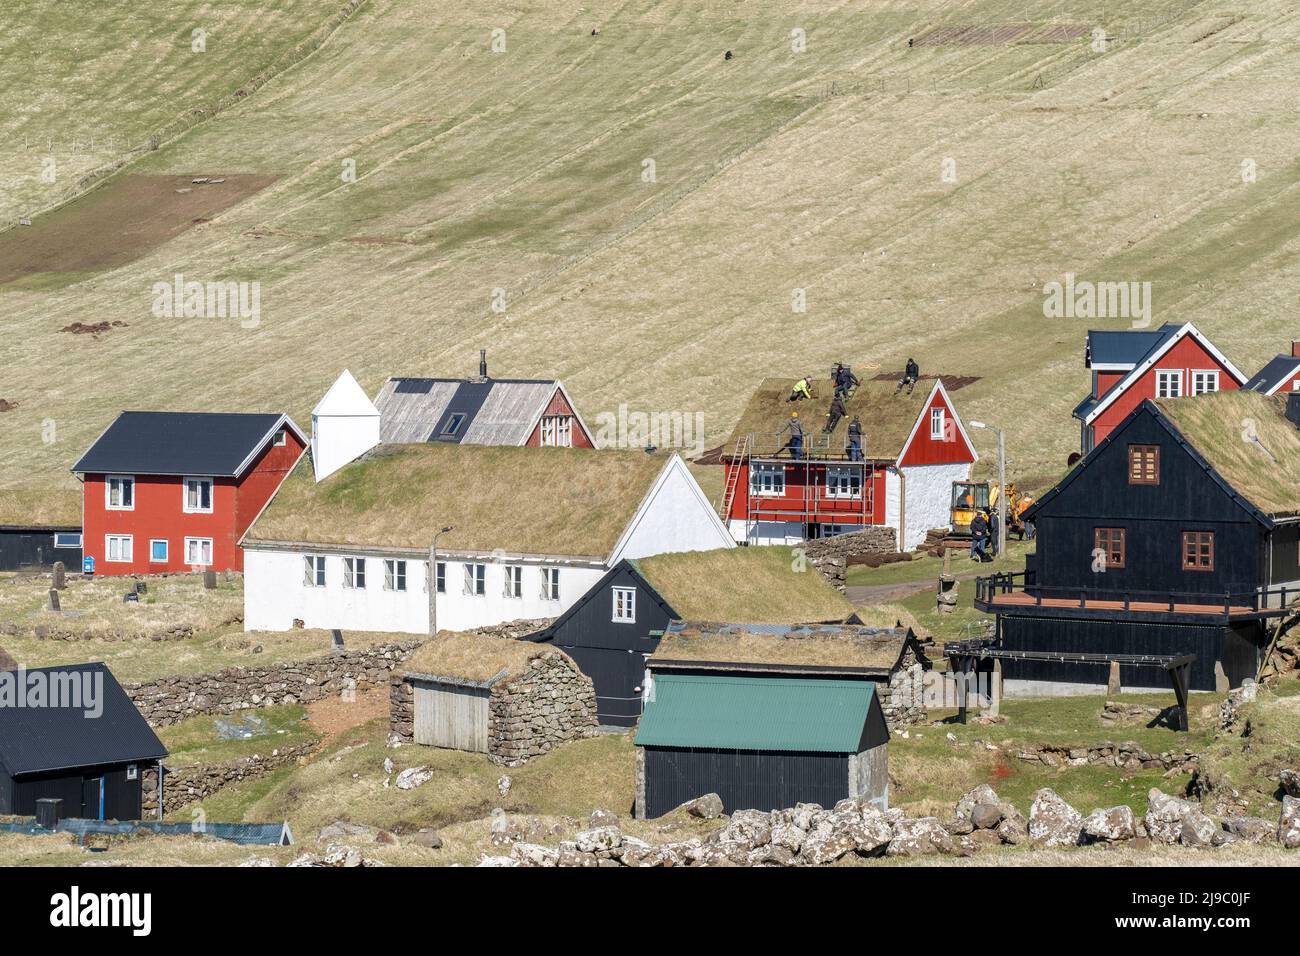 The roofers being lazy on a sunny day in Mykines. Stock Photo